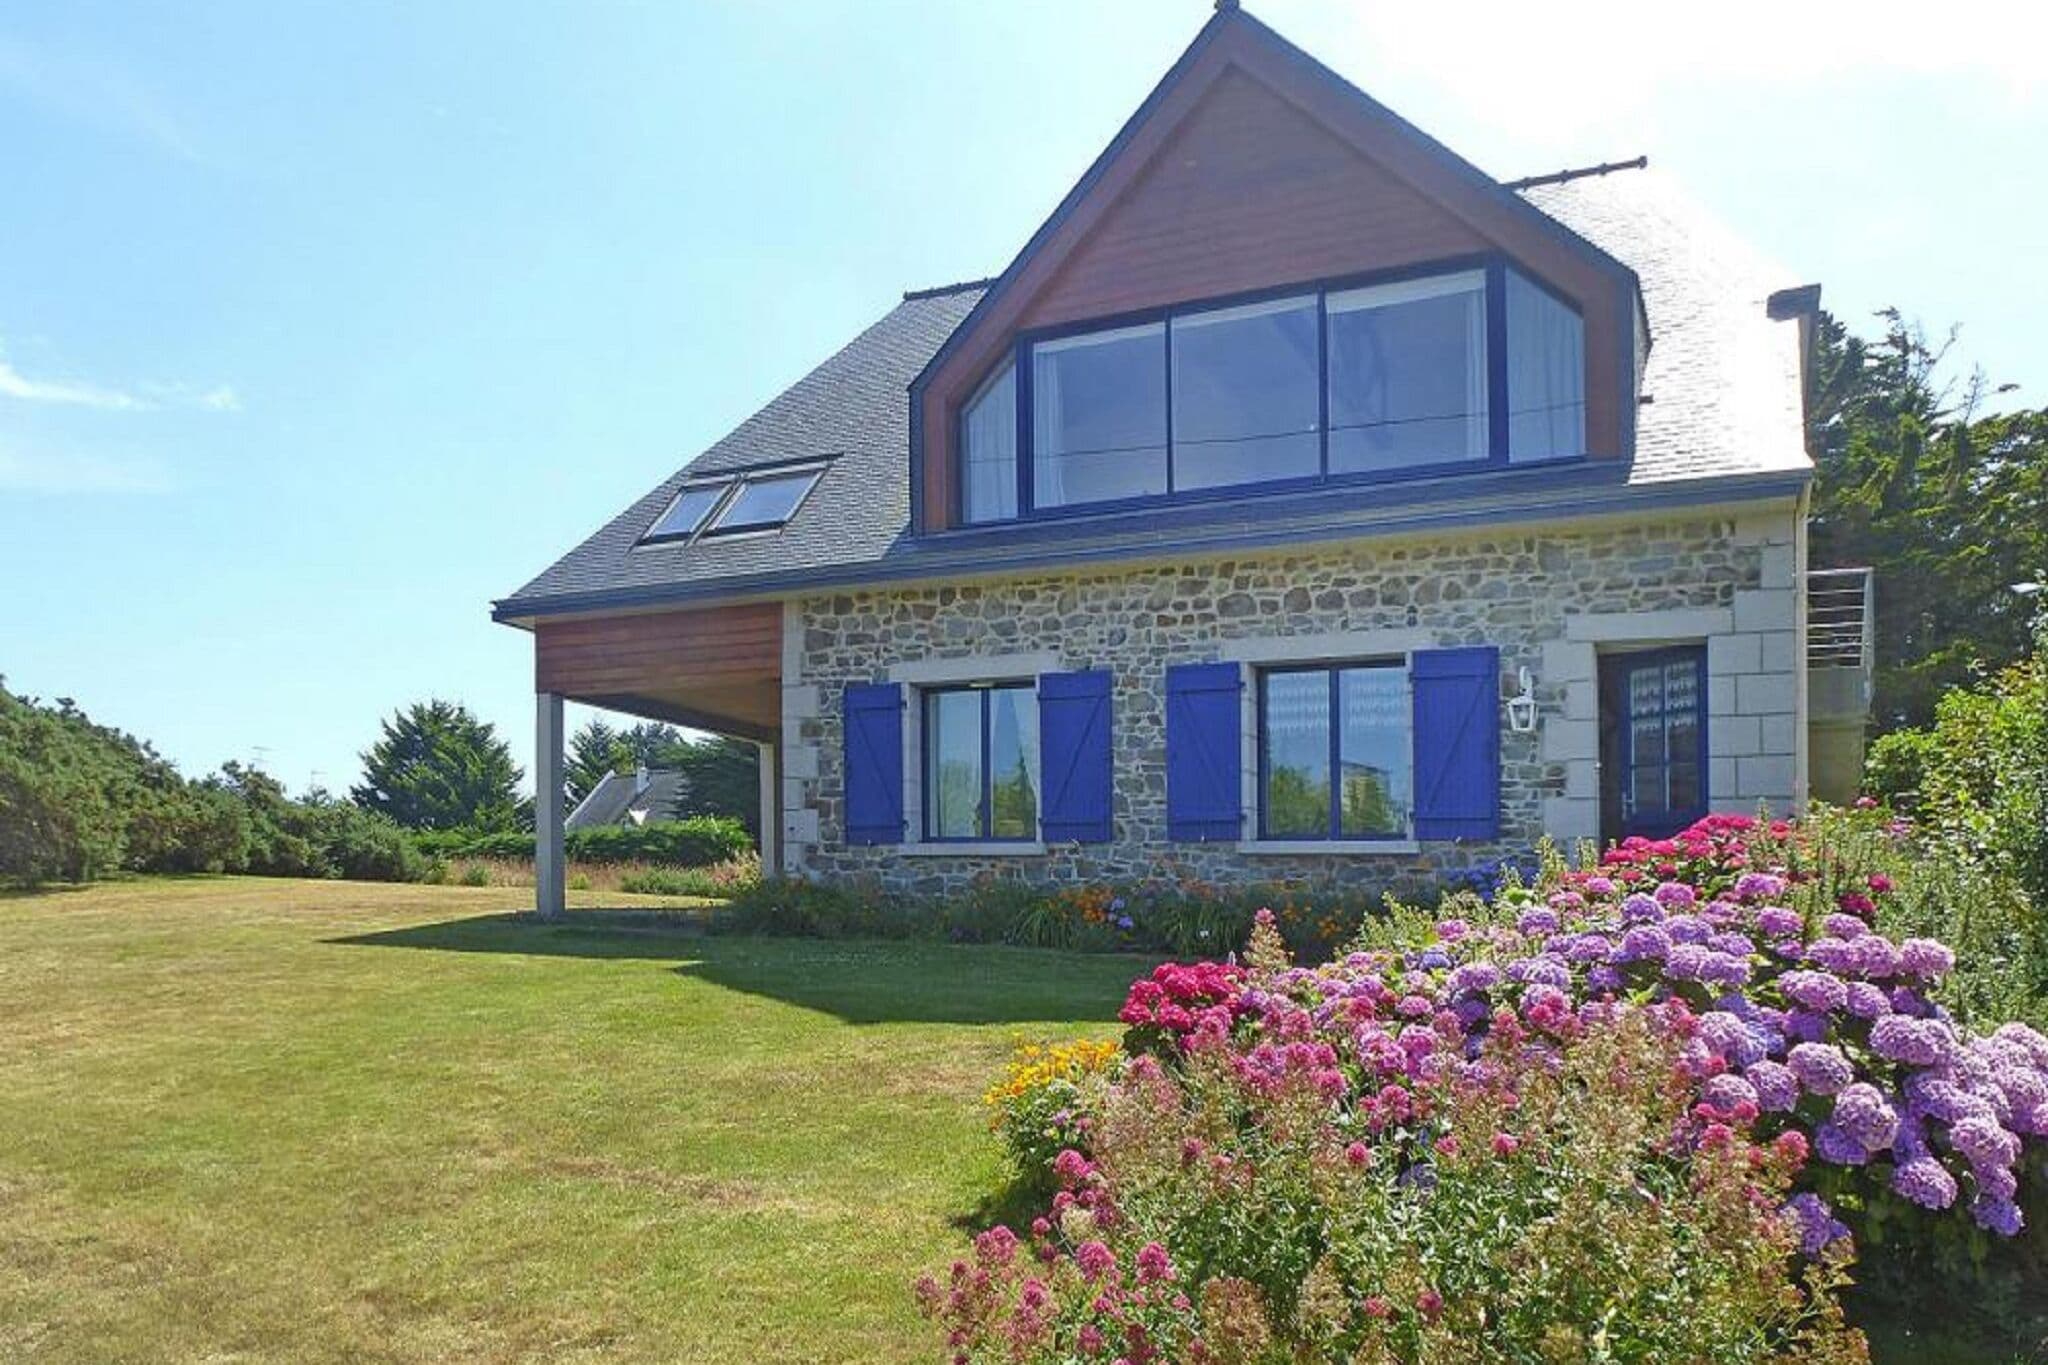 Comfortable holiday home with fantastic sea view